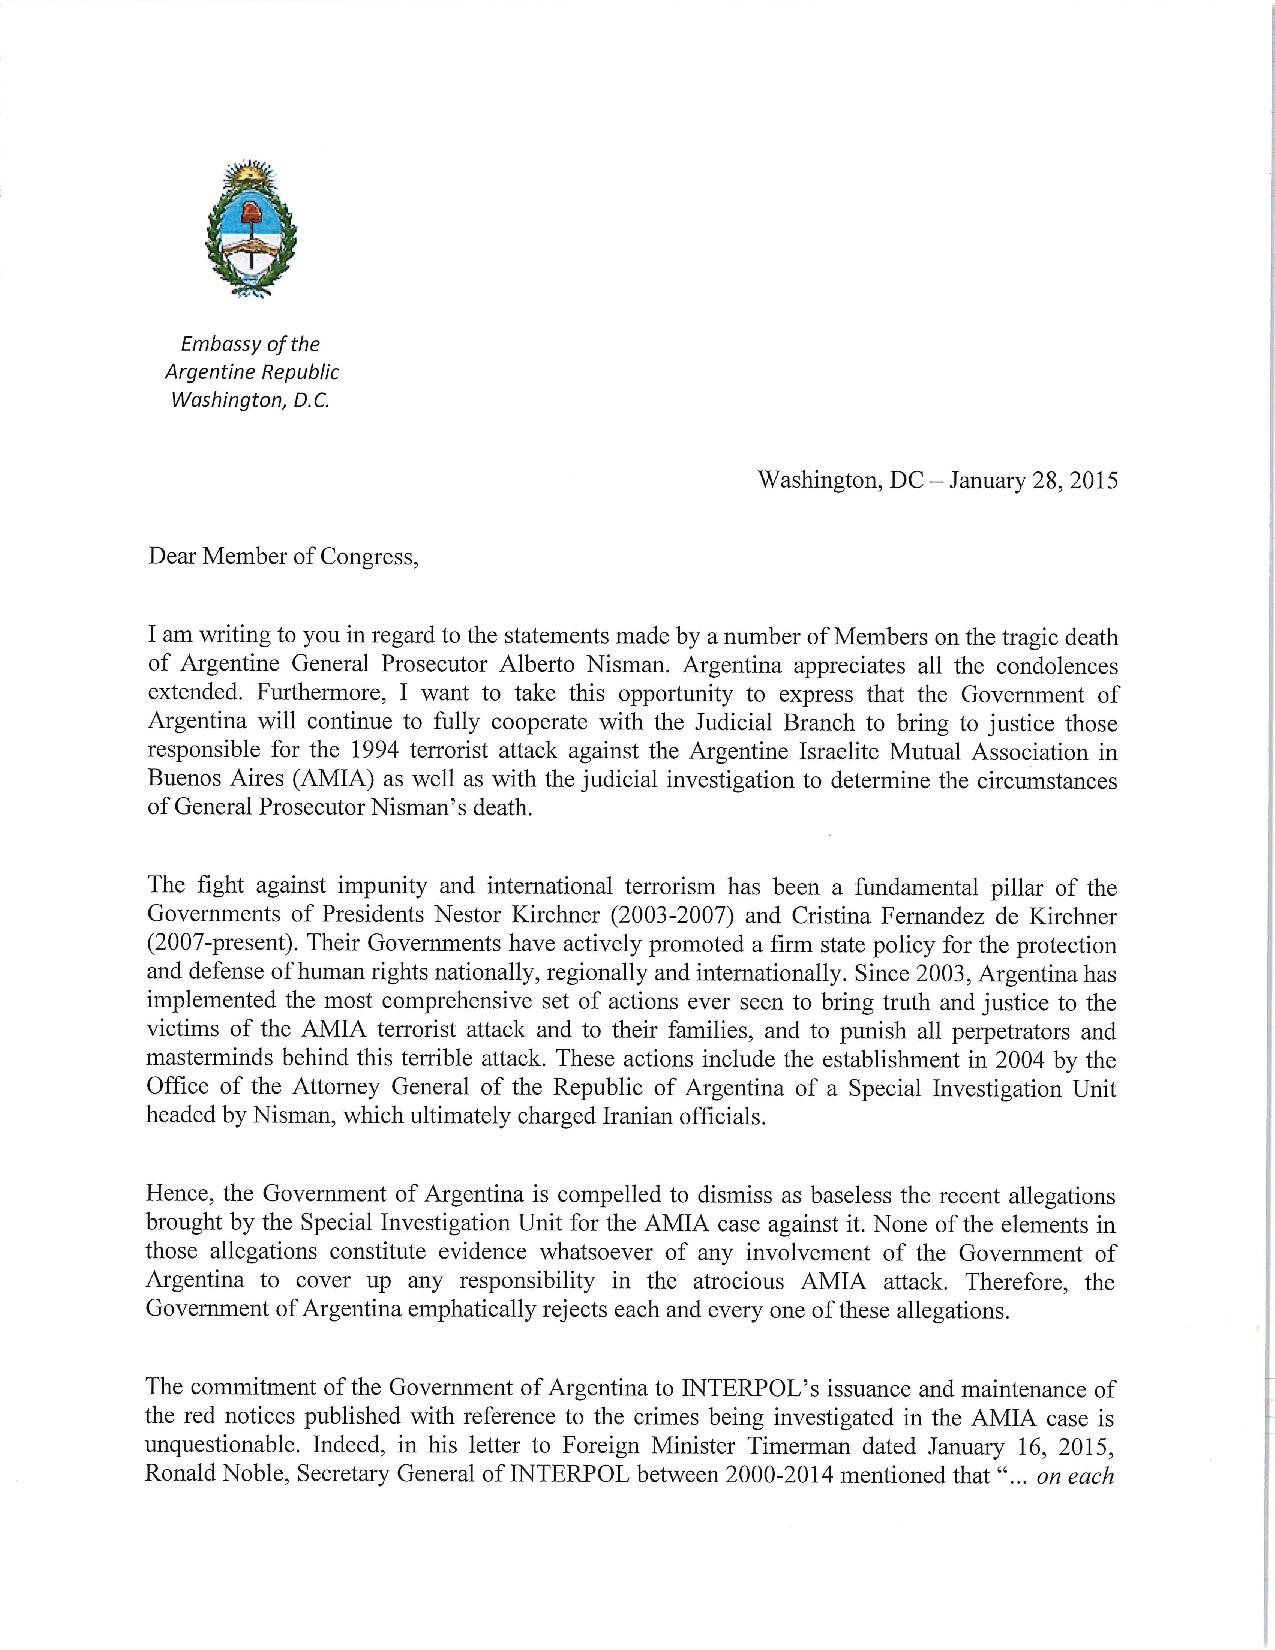 Letter_from_Argentine_Ambassador__H.E._Cecilia_Nahon__regarding_the_AMIA_case_and_the_death_of_Argentine_General_Prosecutor_Alberto_Nisman-page-001